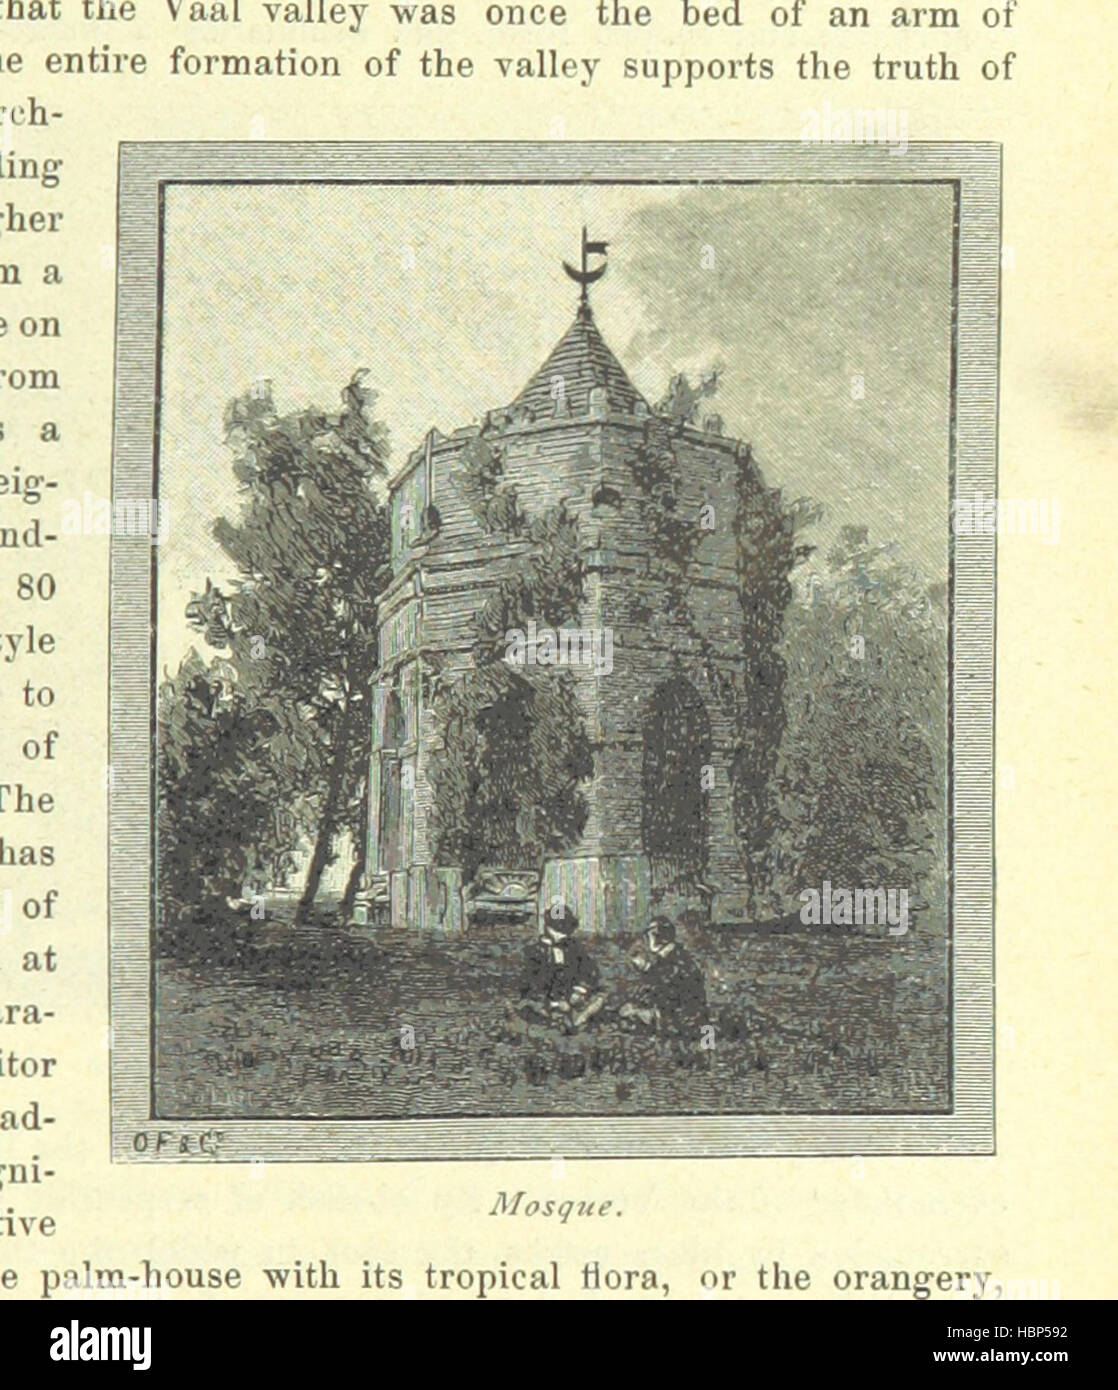 Image taken from page 41 of 'Hungary. [A guide book. By several authors.] With ... illustrations, etc' Image taken from page 41 of 'Hungary [A guide book Stock Photo